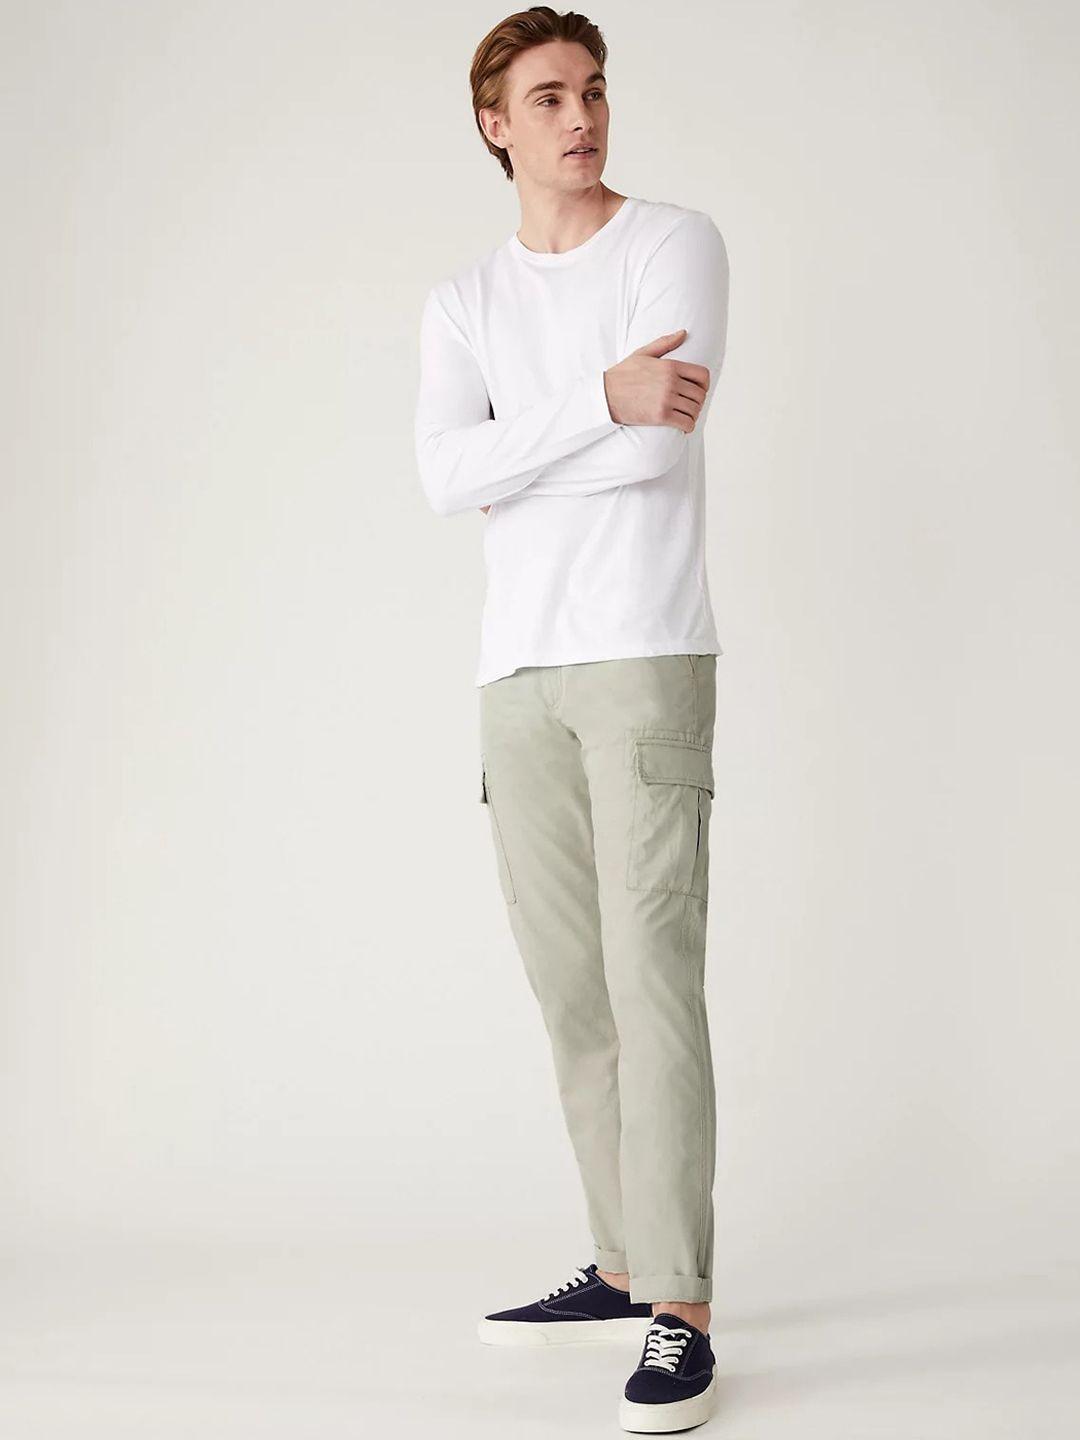 marks-&-spencer-men-mid-rise-pure-cotton-cargos